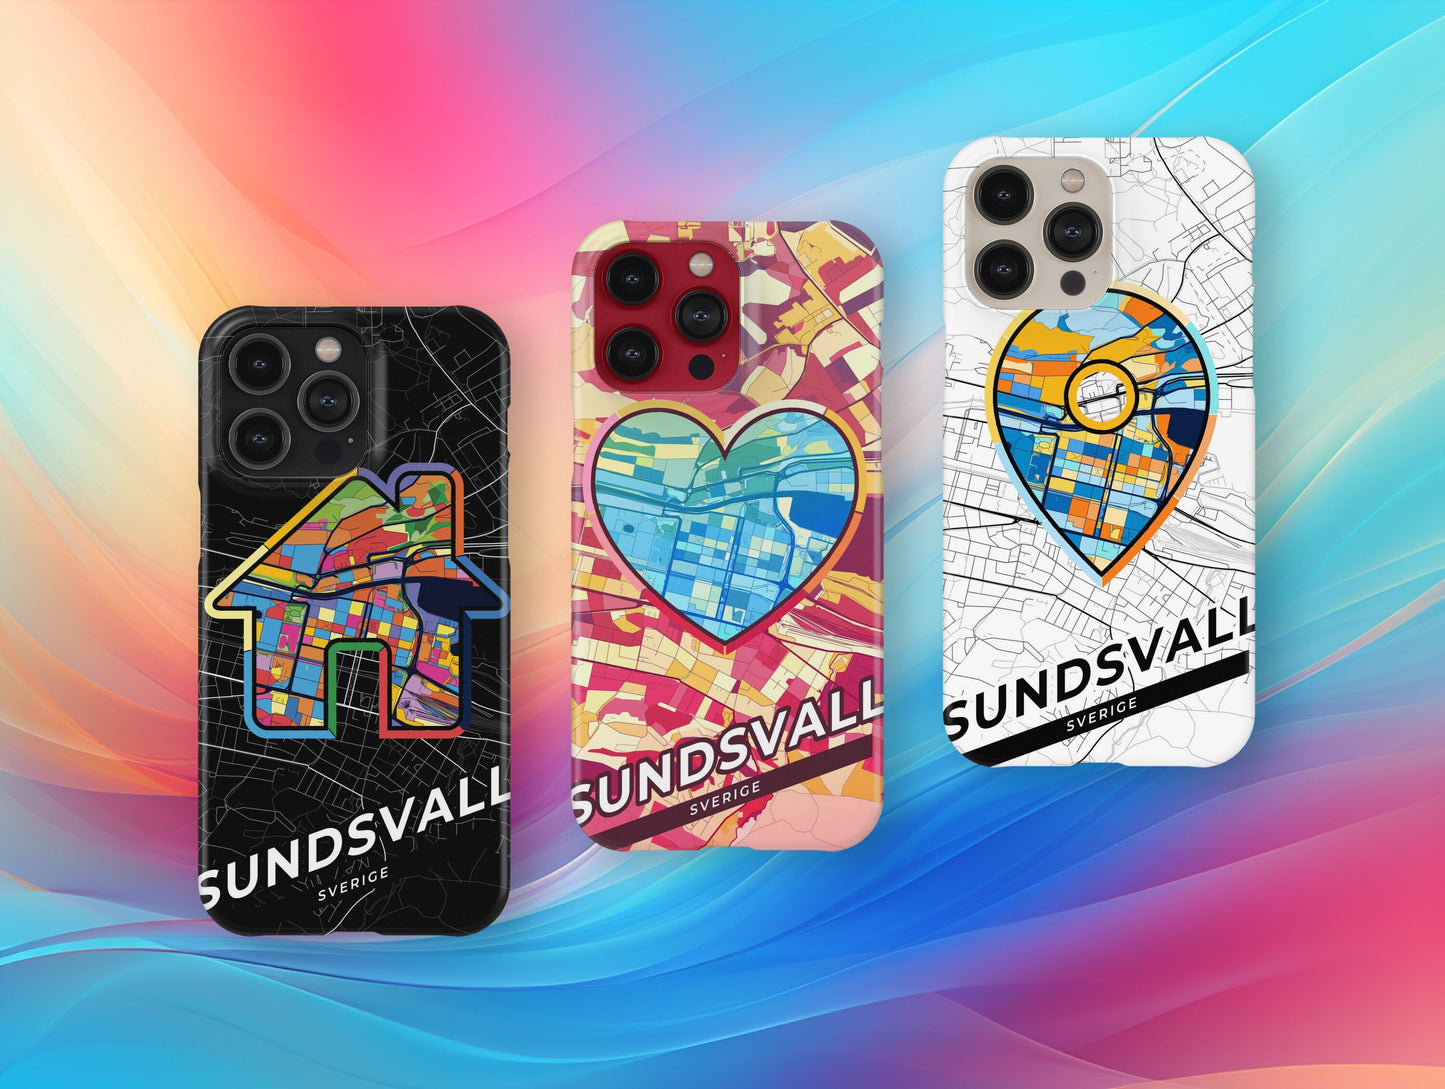 Sundsvall Sweden slim phone case with colorful icon